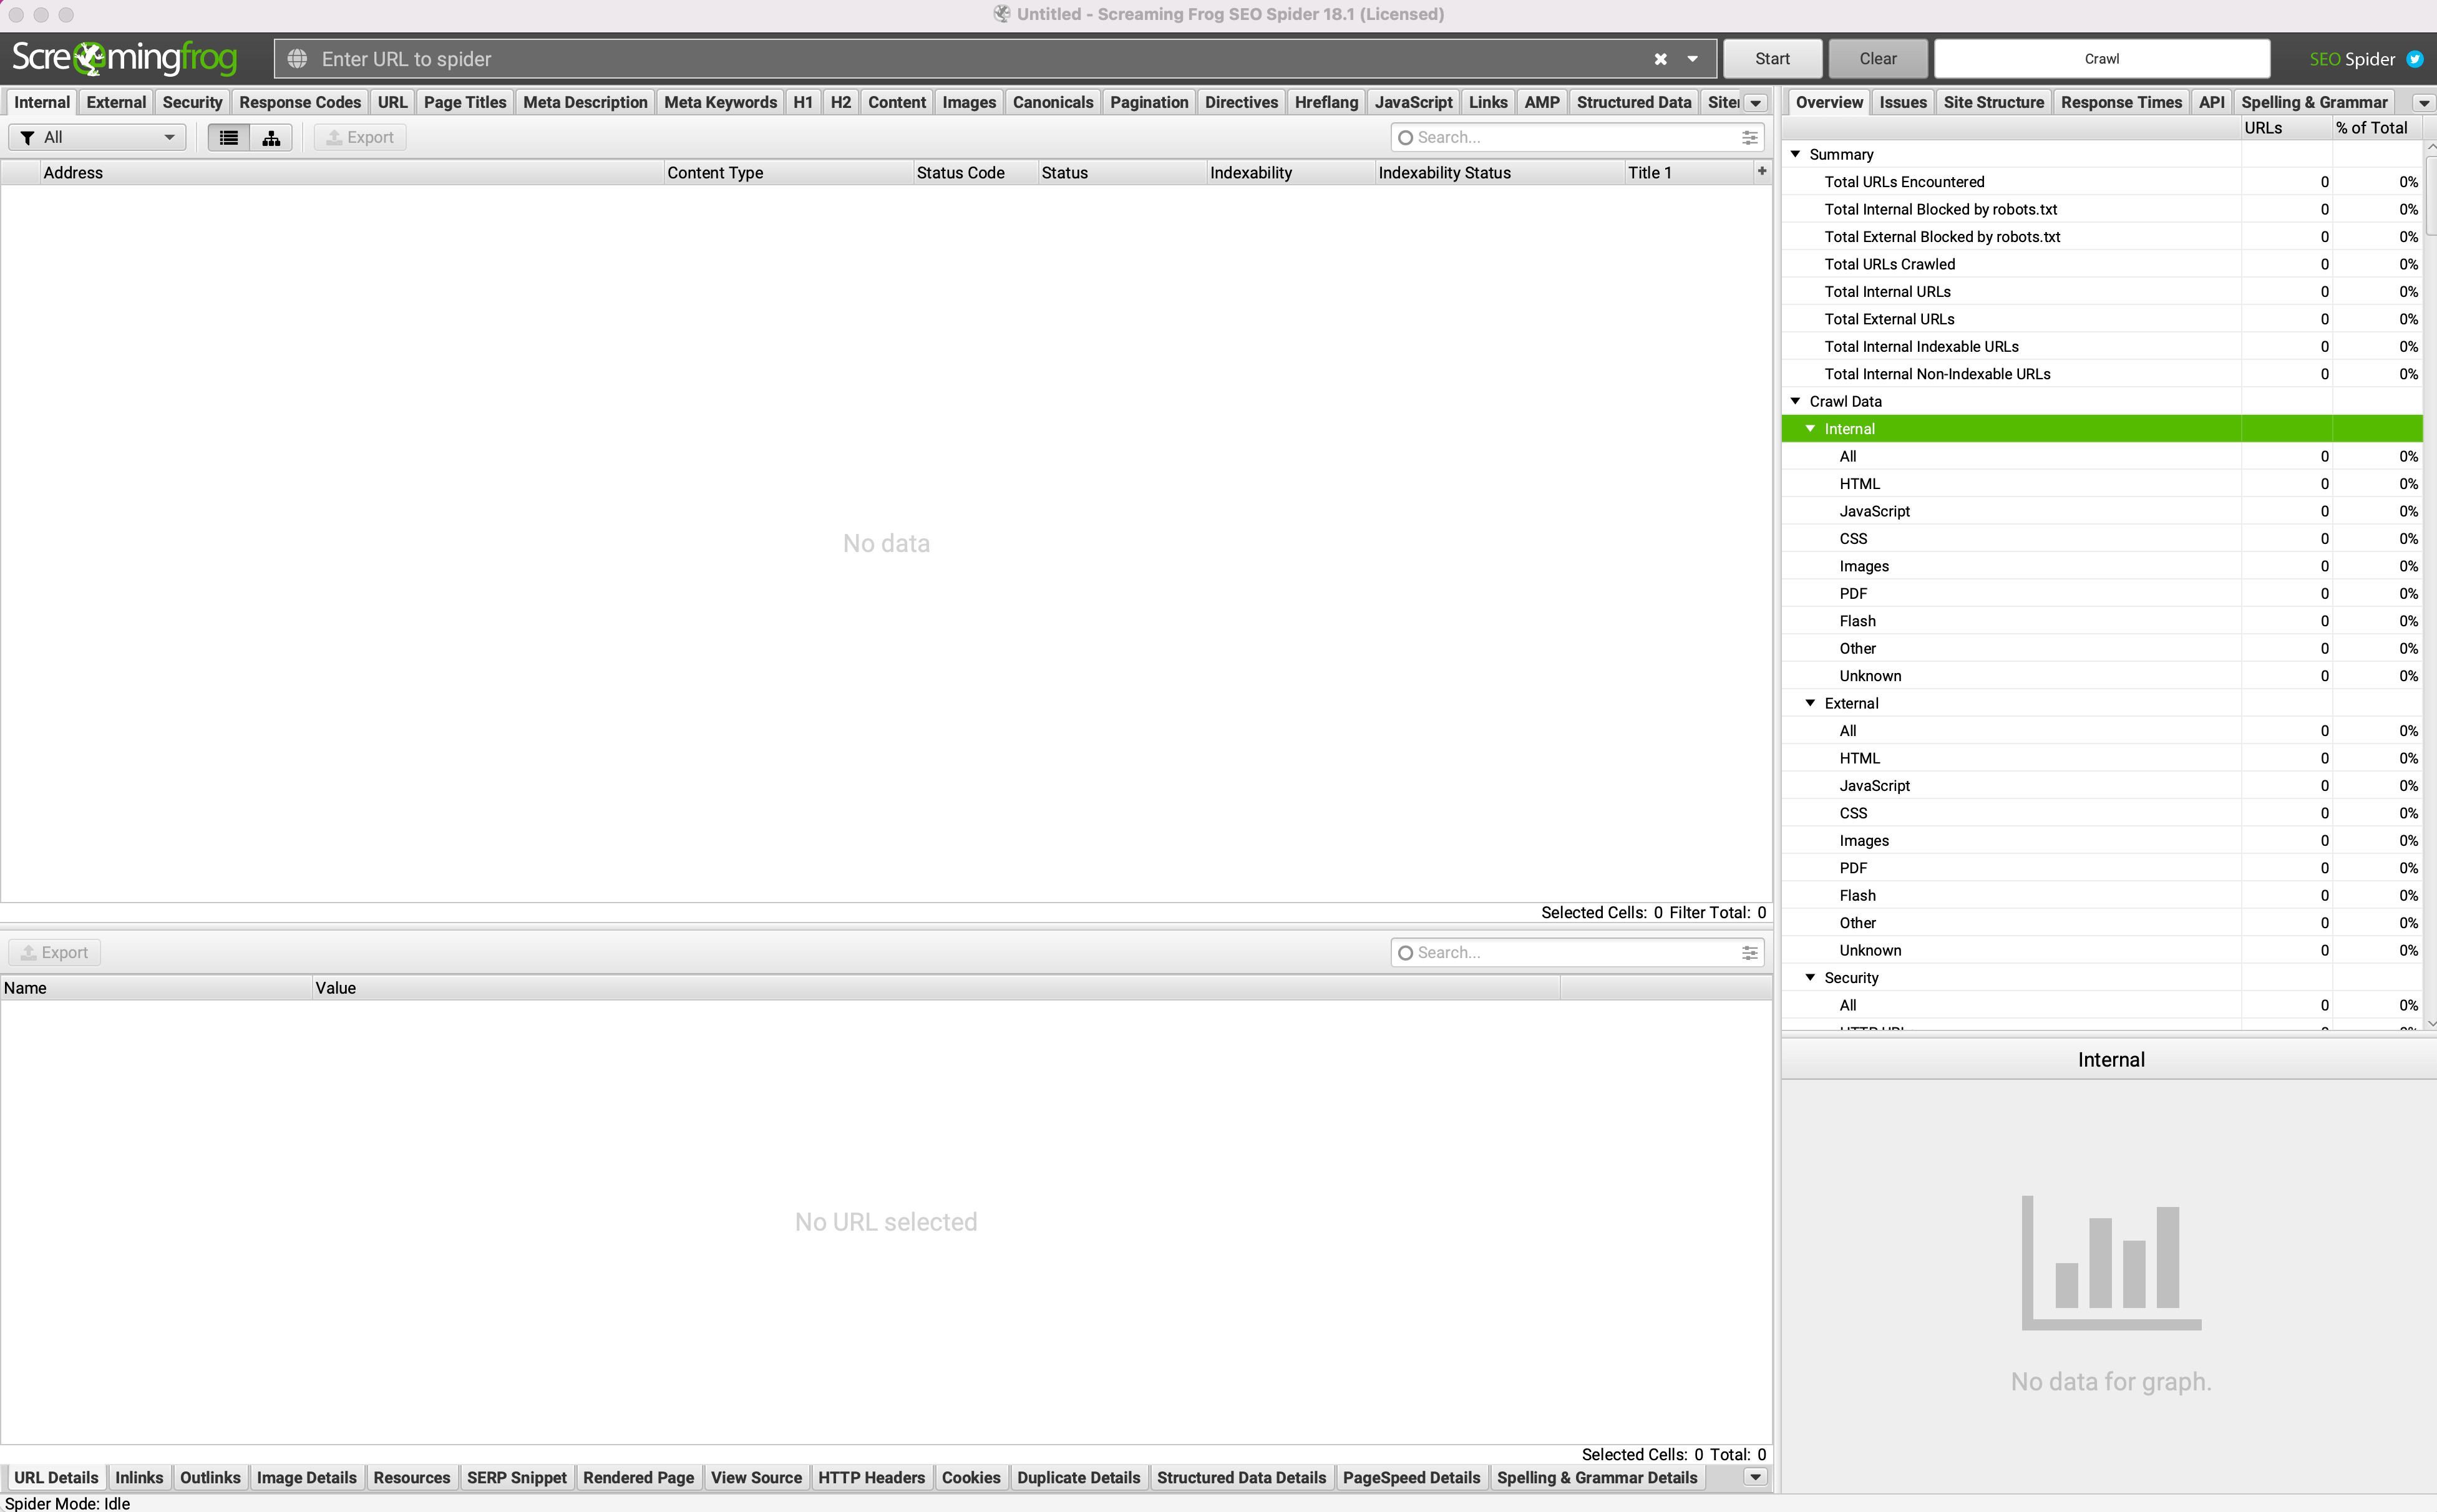 Screenshot of the interface of Screaming Frog SEO Spider